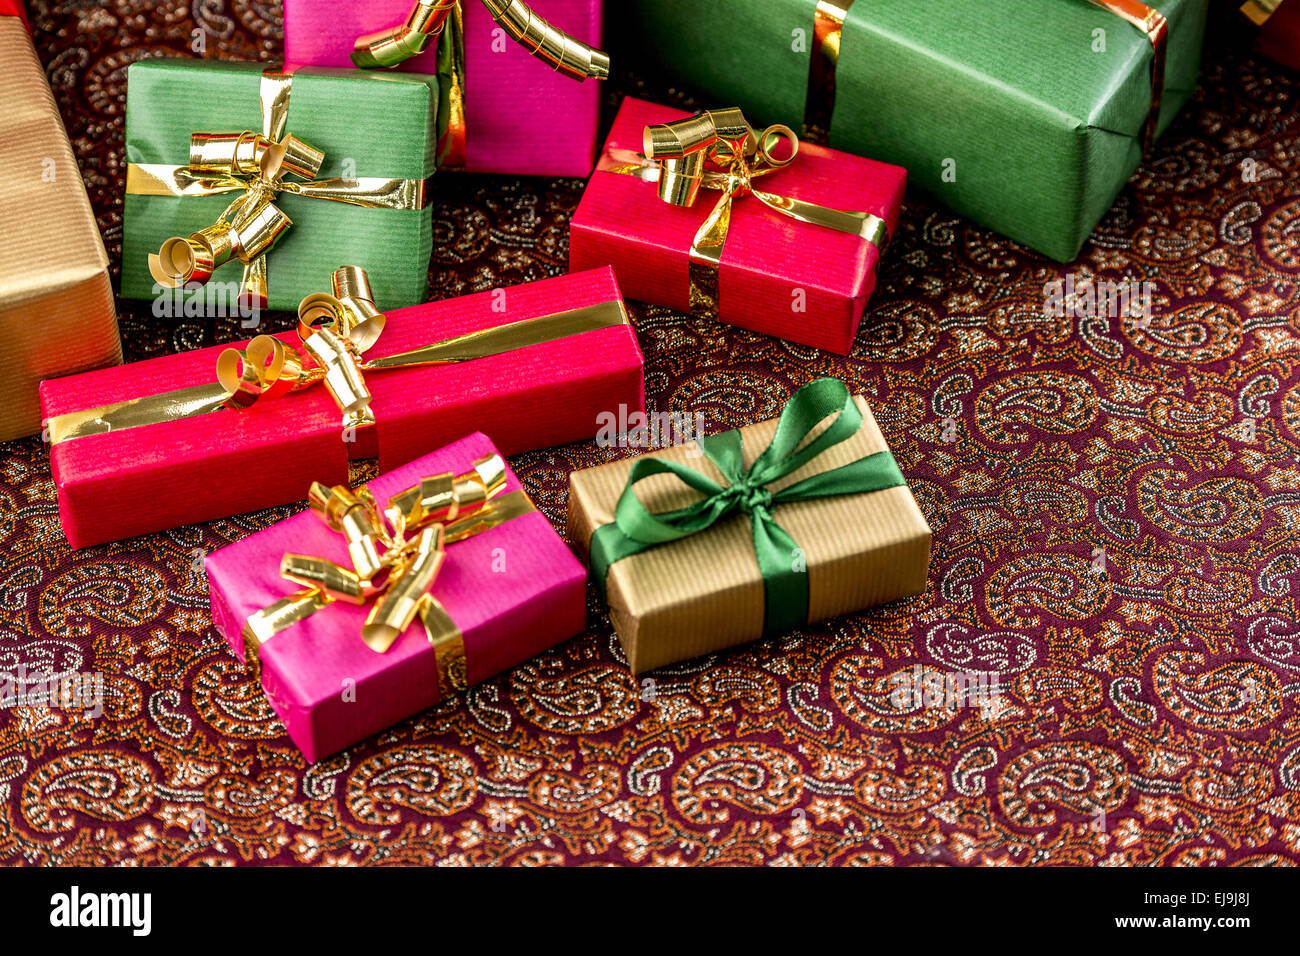 Festive Cloth, Half Covered with Gifts Stock Photo